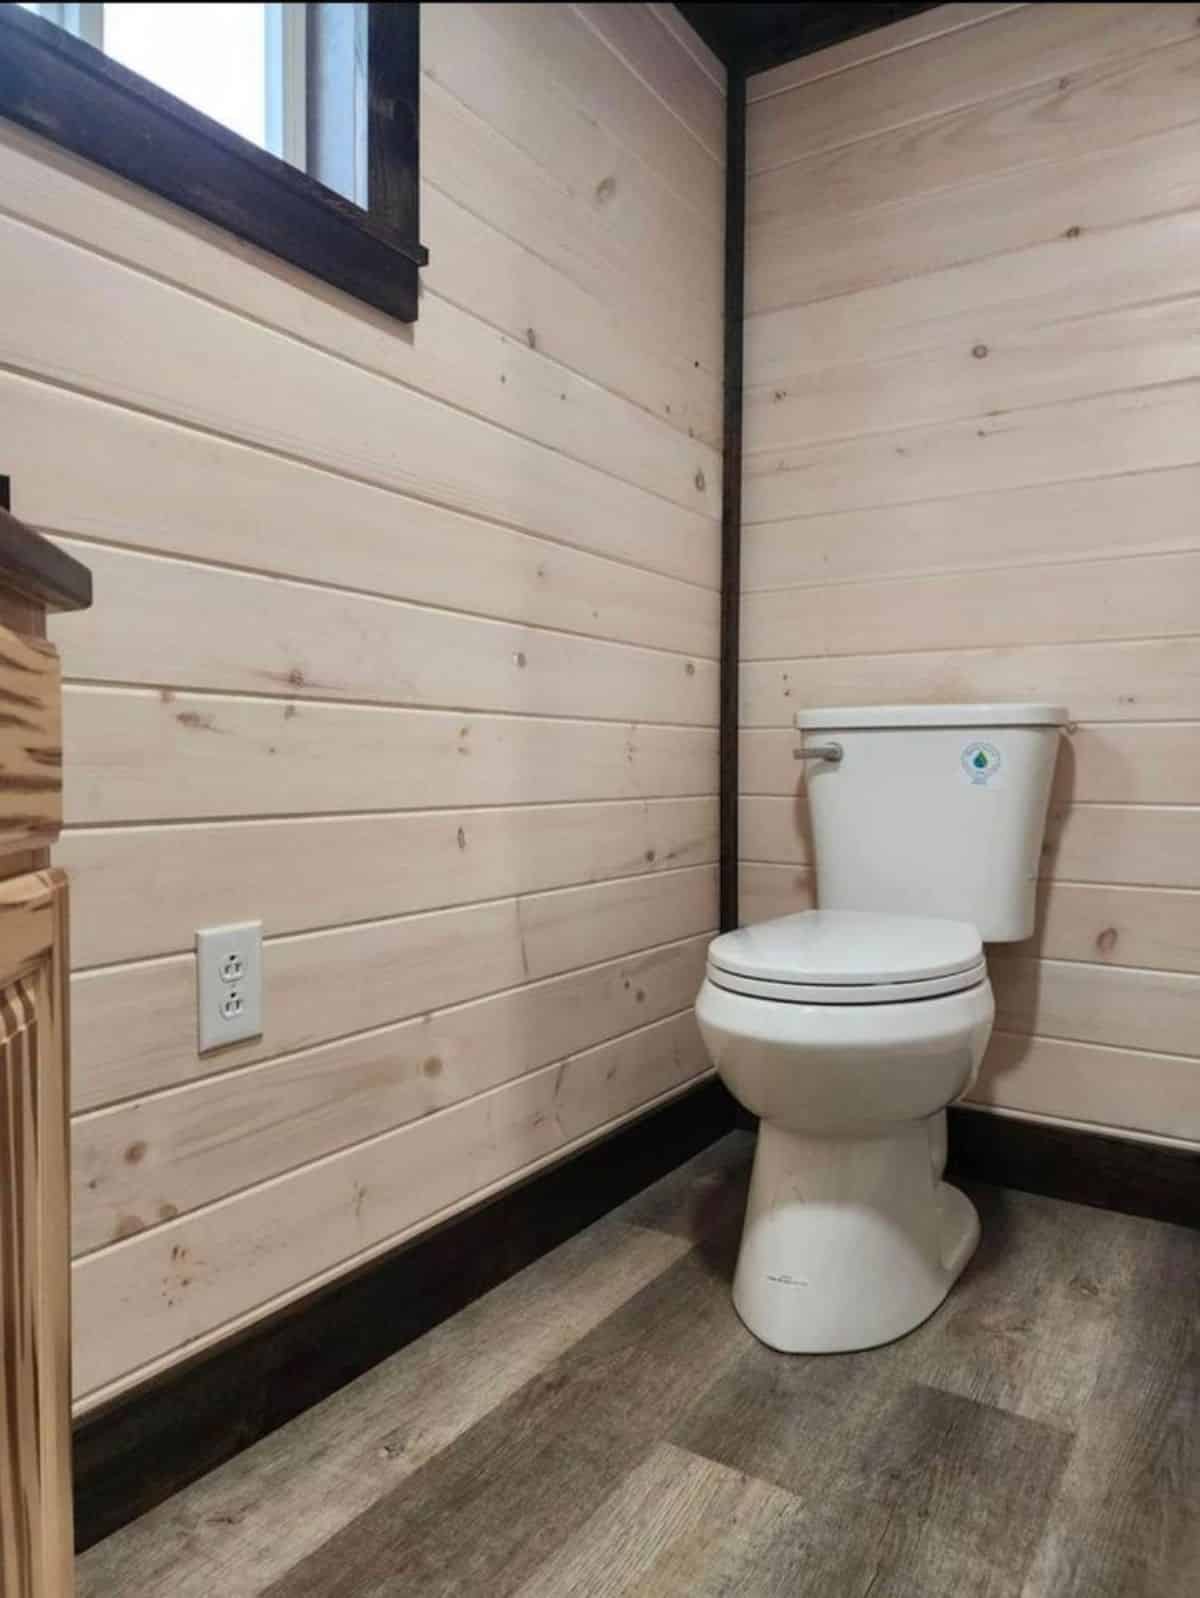 standard toilet in bathroom of spacious tiny home